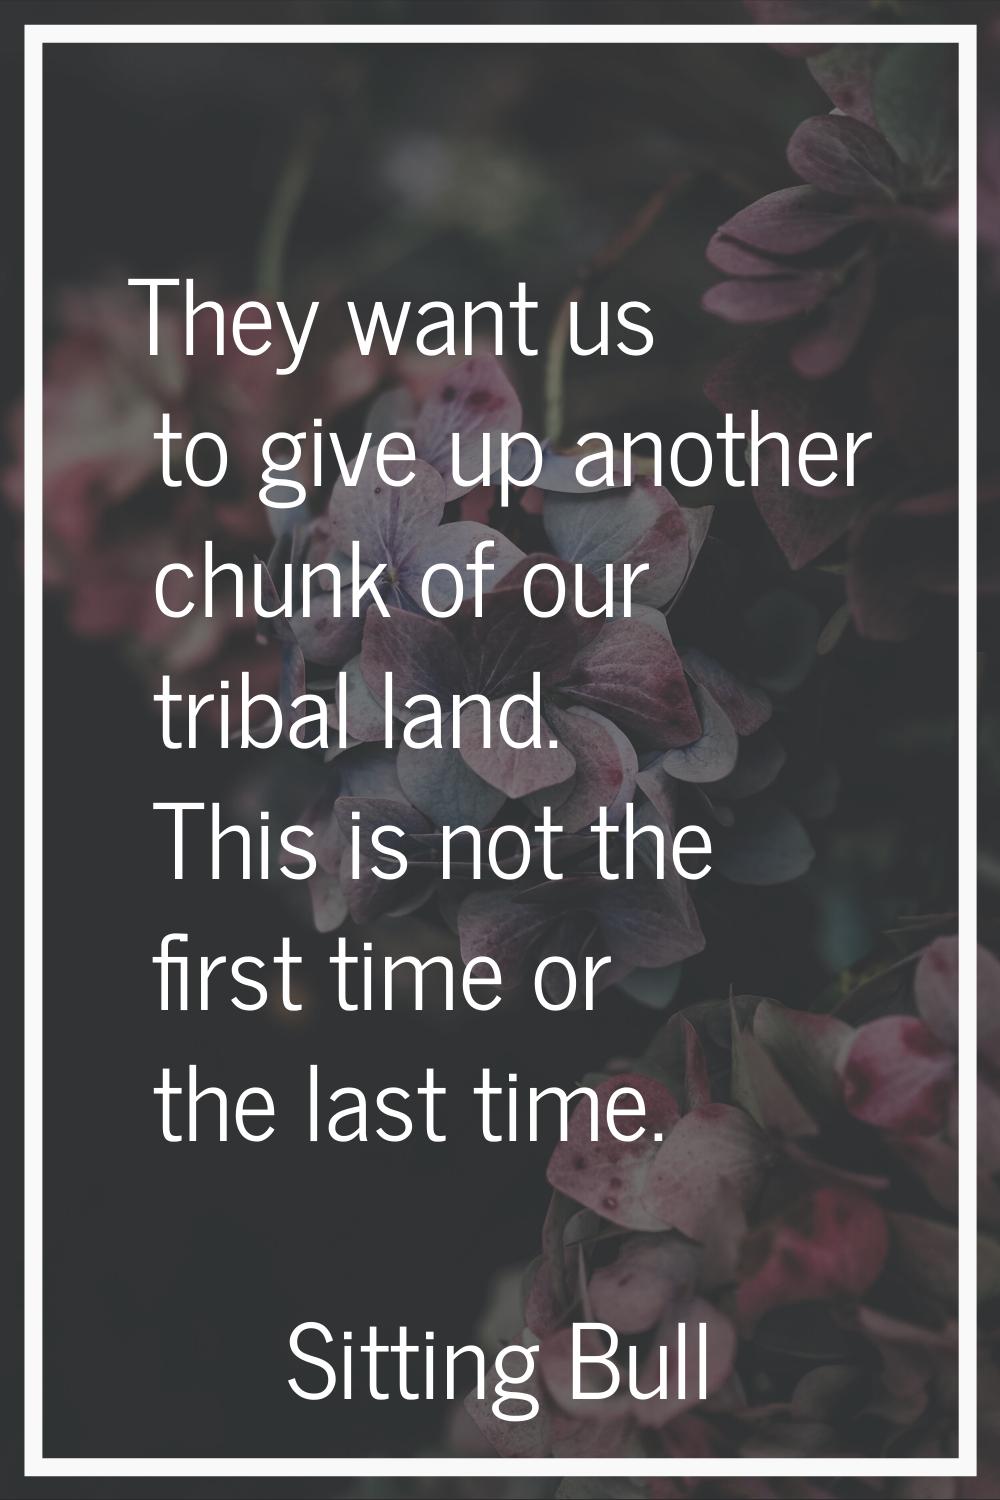 They want us to give up another chunk of our tribal land. This is not the first time or the last ti